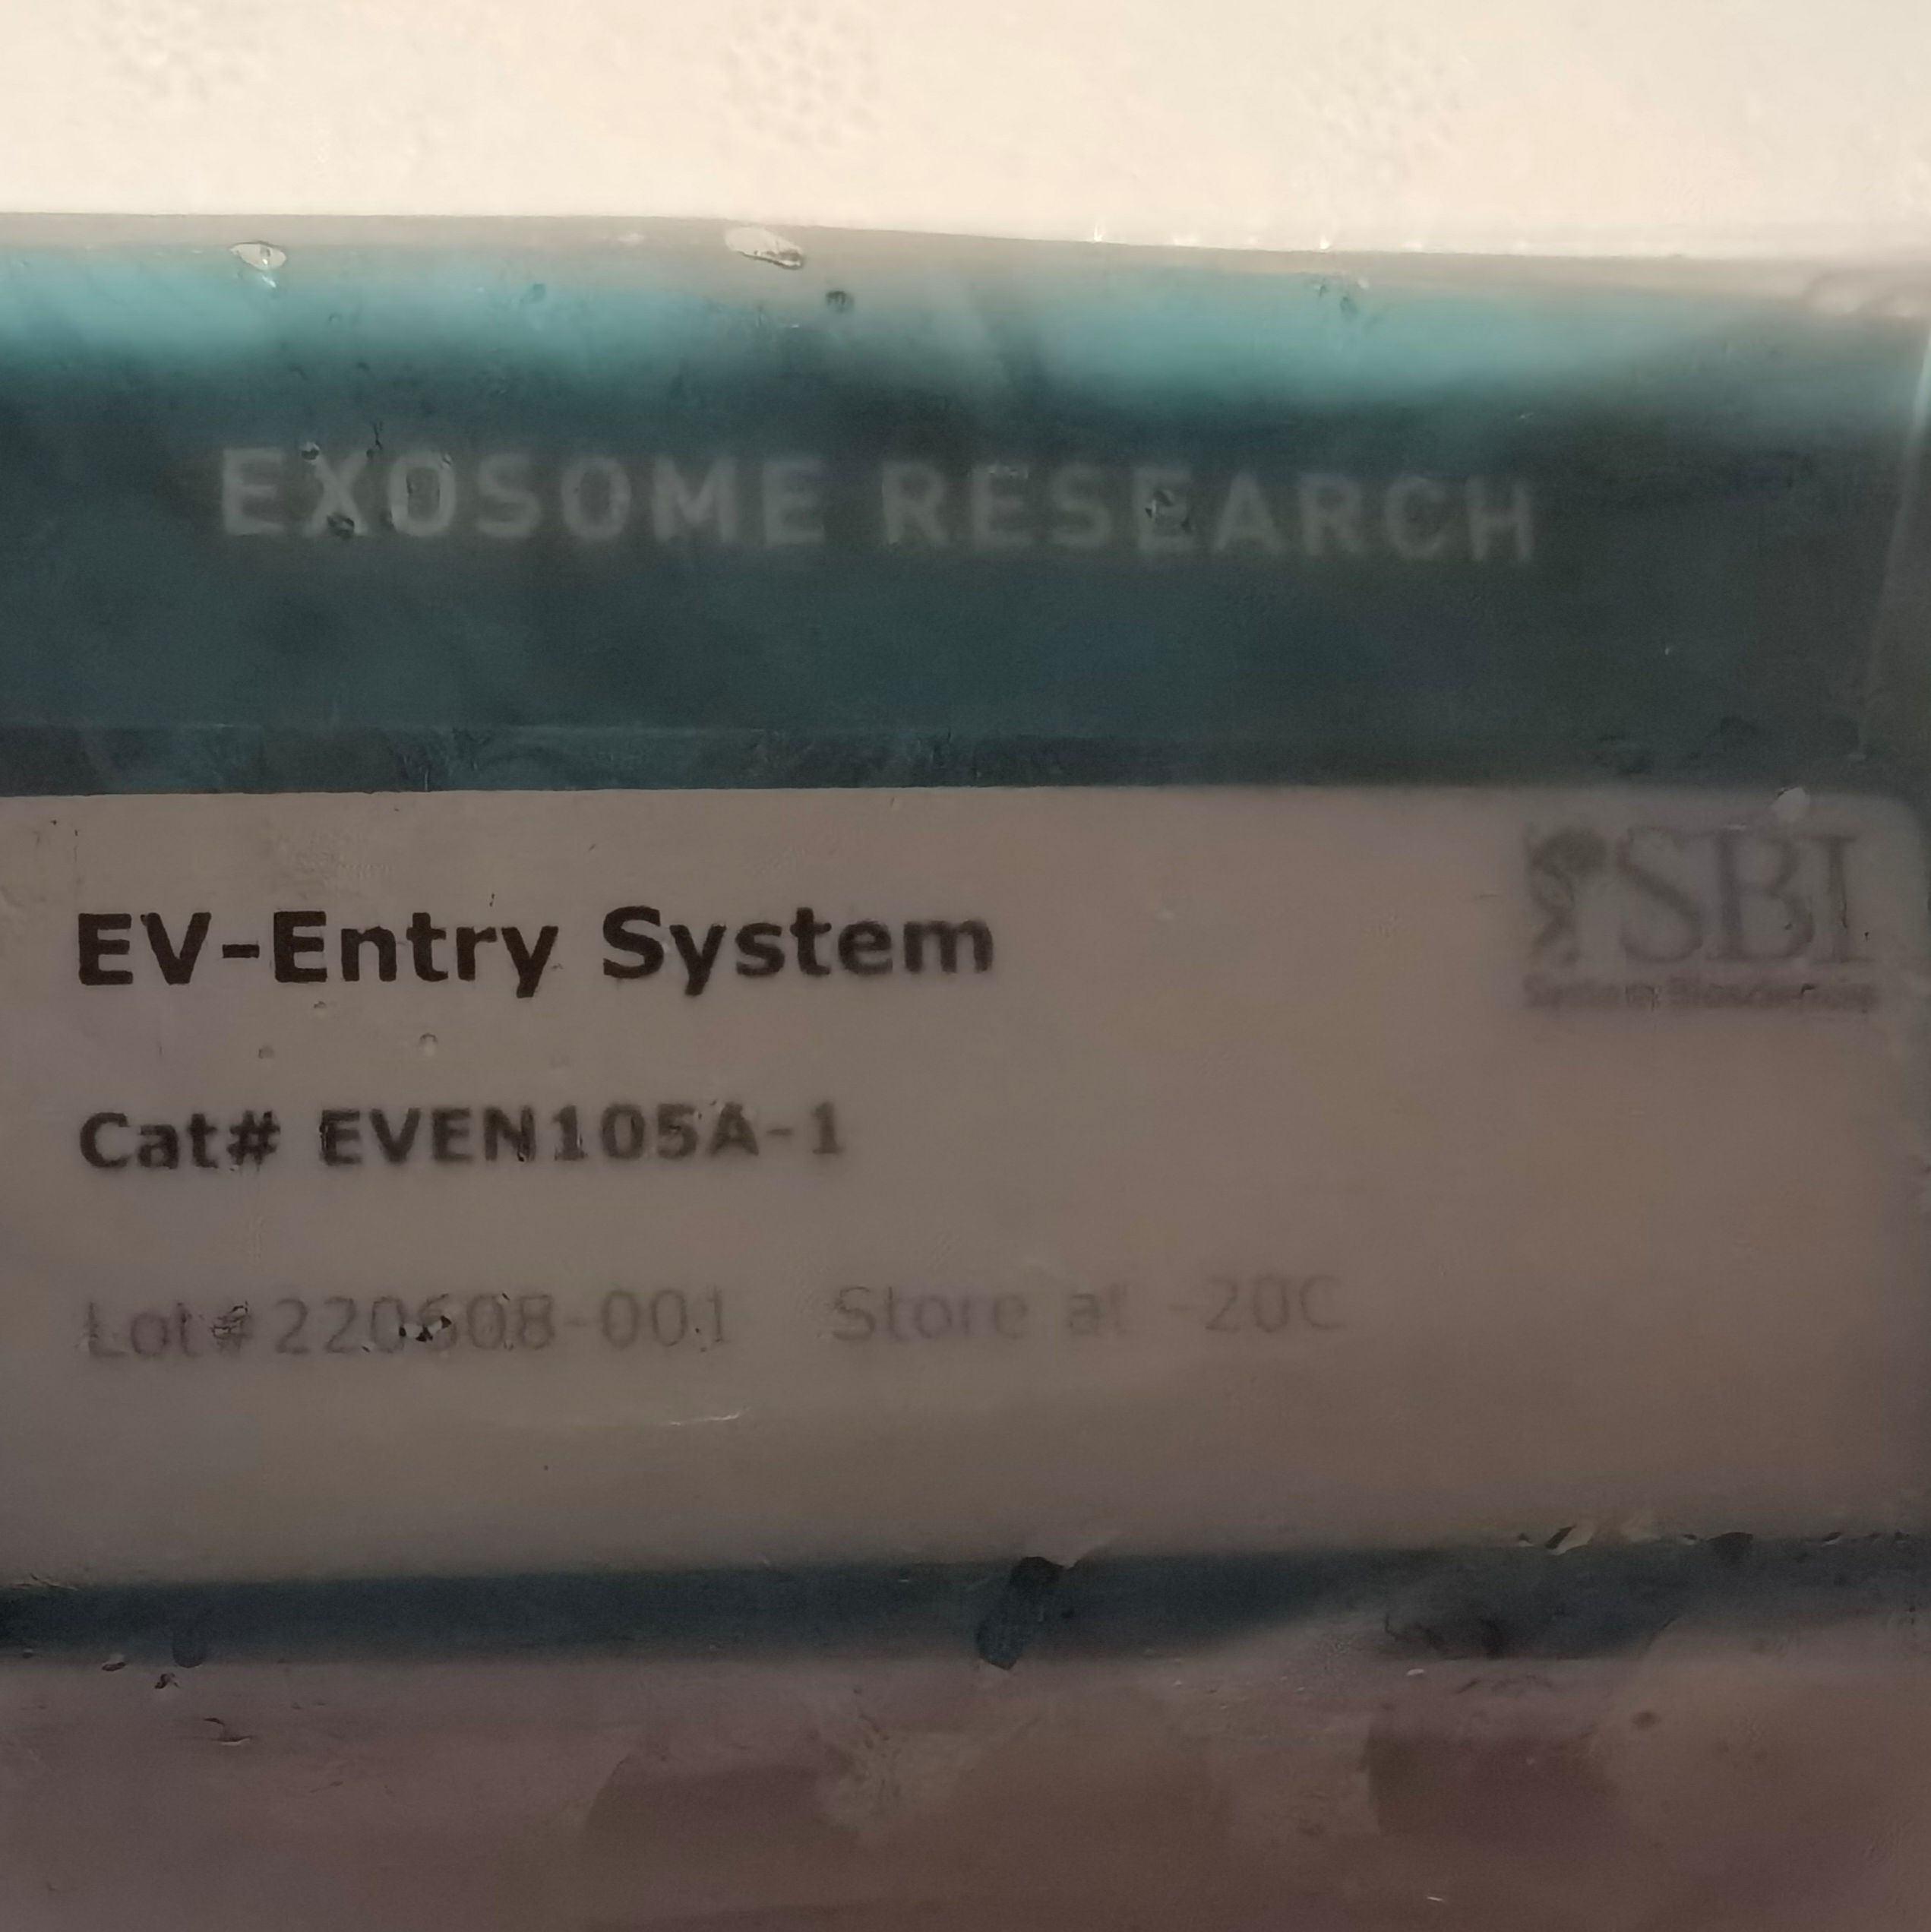 EV-Entry System for Exosome Delivery (5 rxn(试剂),EVEN105A-1,EVEN110A-1